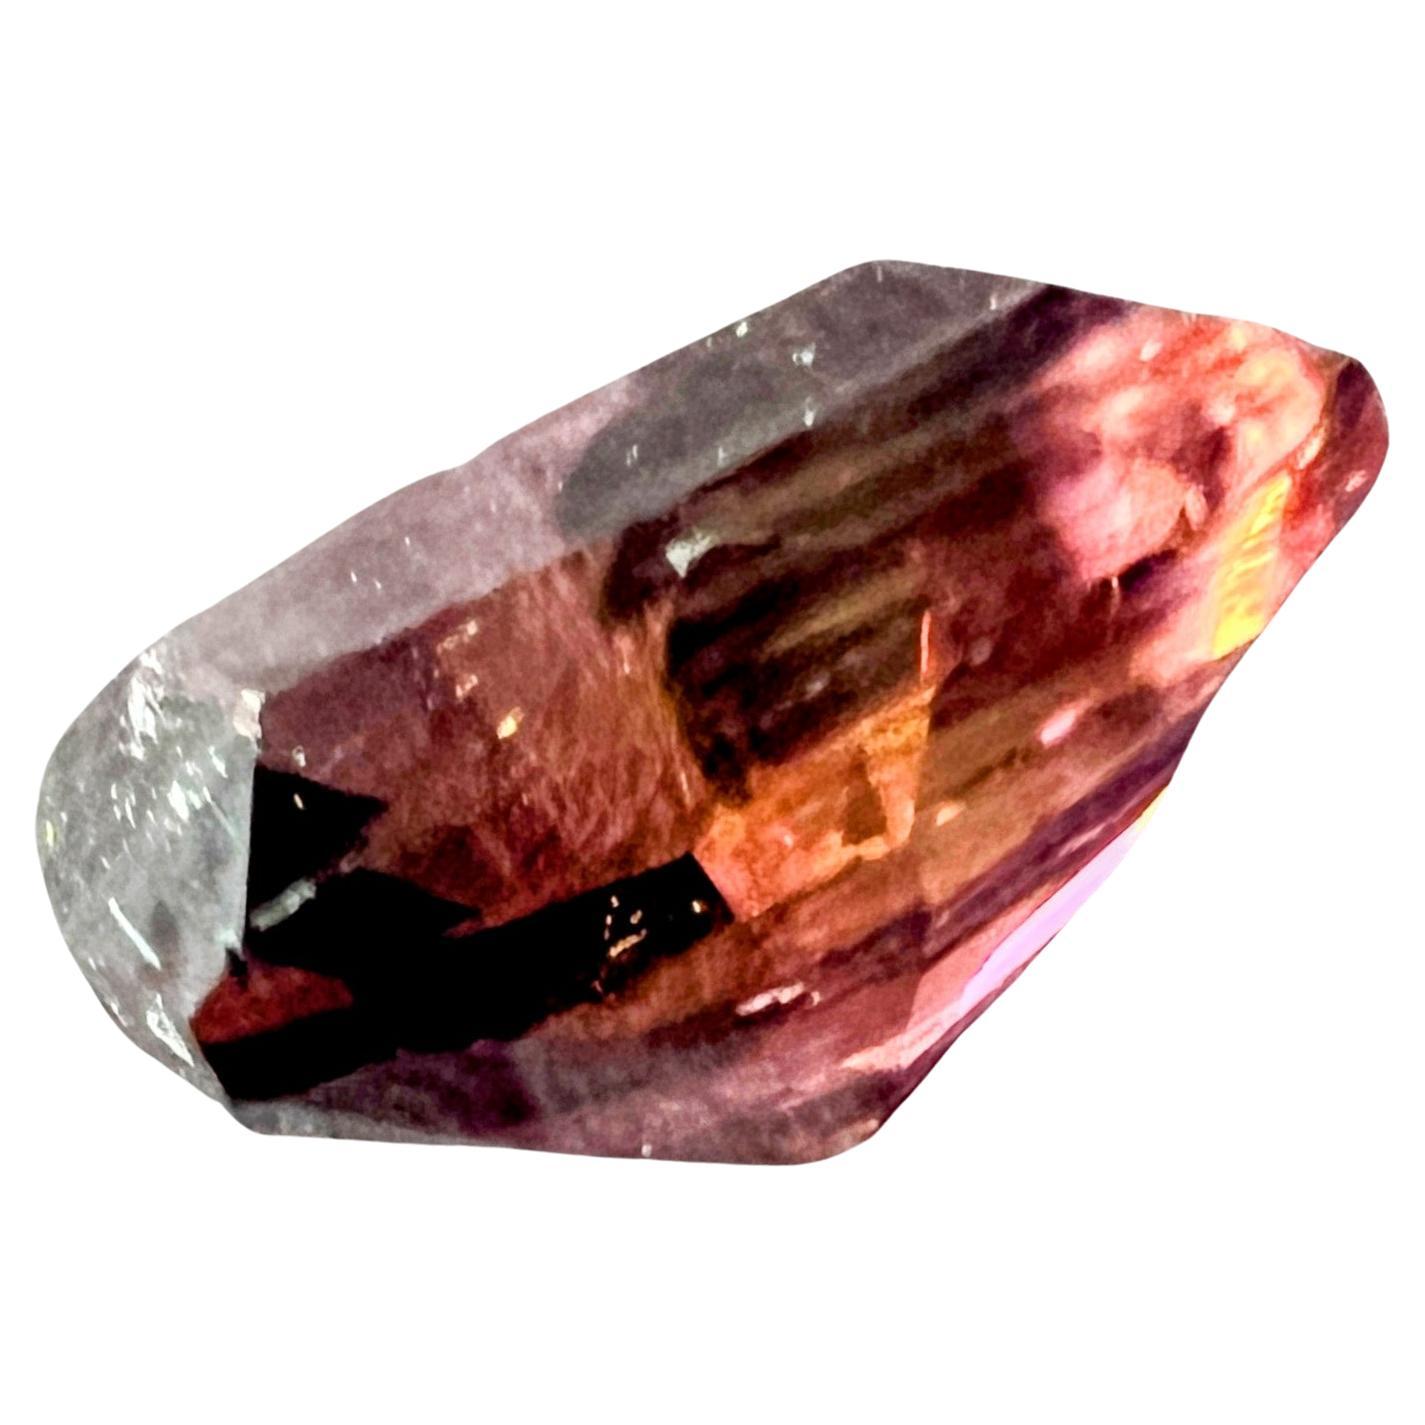 Take a look at this truly exceptional gemstone that is sure to captivate your senses – the 6.125-carat Square Bi-color Tourmaline with enchanting pink hues. This loose gemstone is a radiant masterpiece of nature, destined to be the focal point of